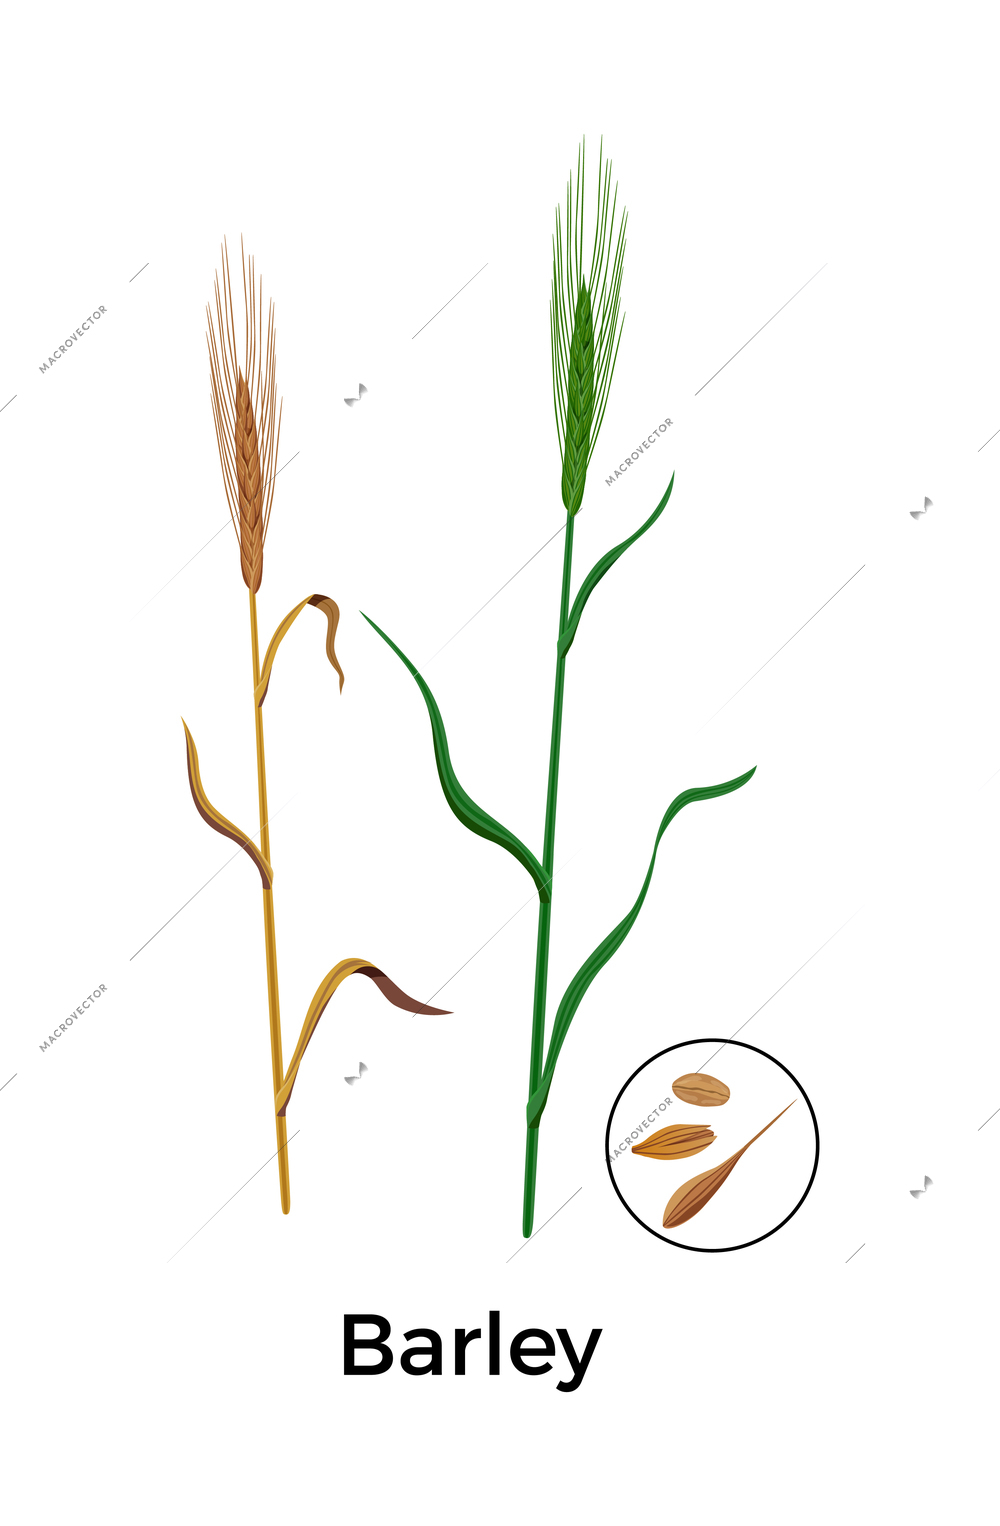 Cereal plants seeds botanical composition with images of barley plants with round icon of seeds vector illustration